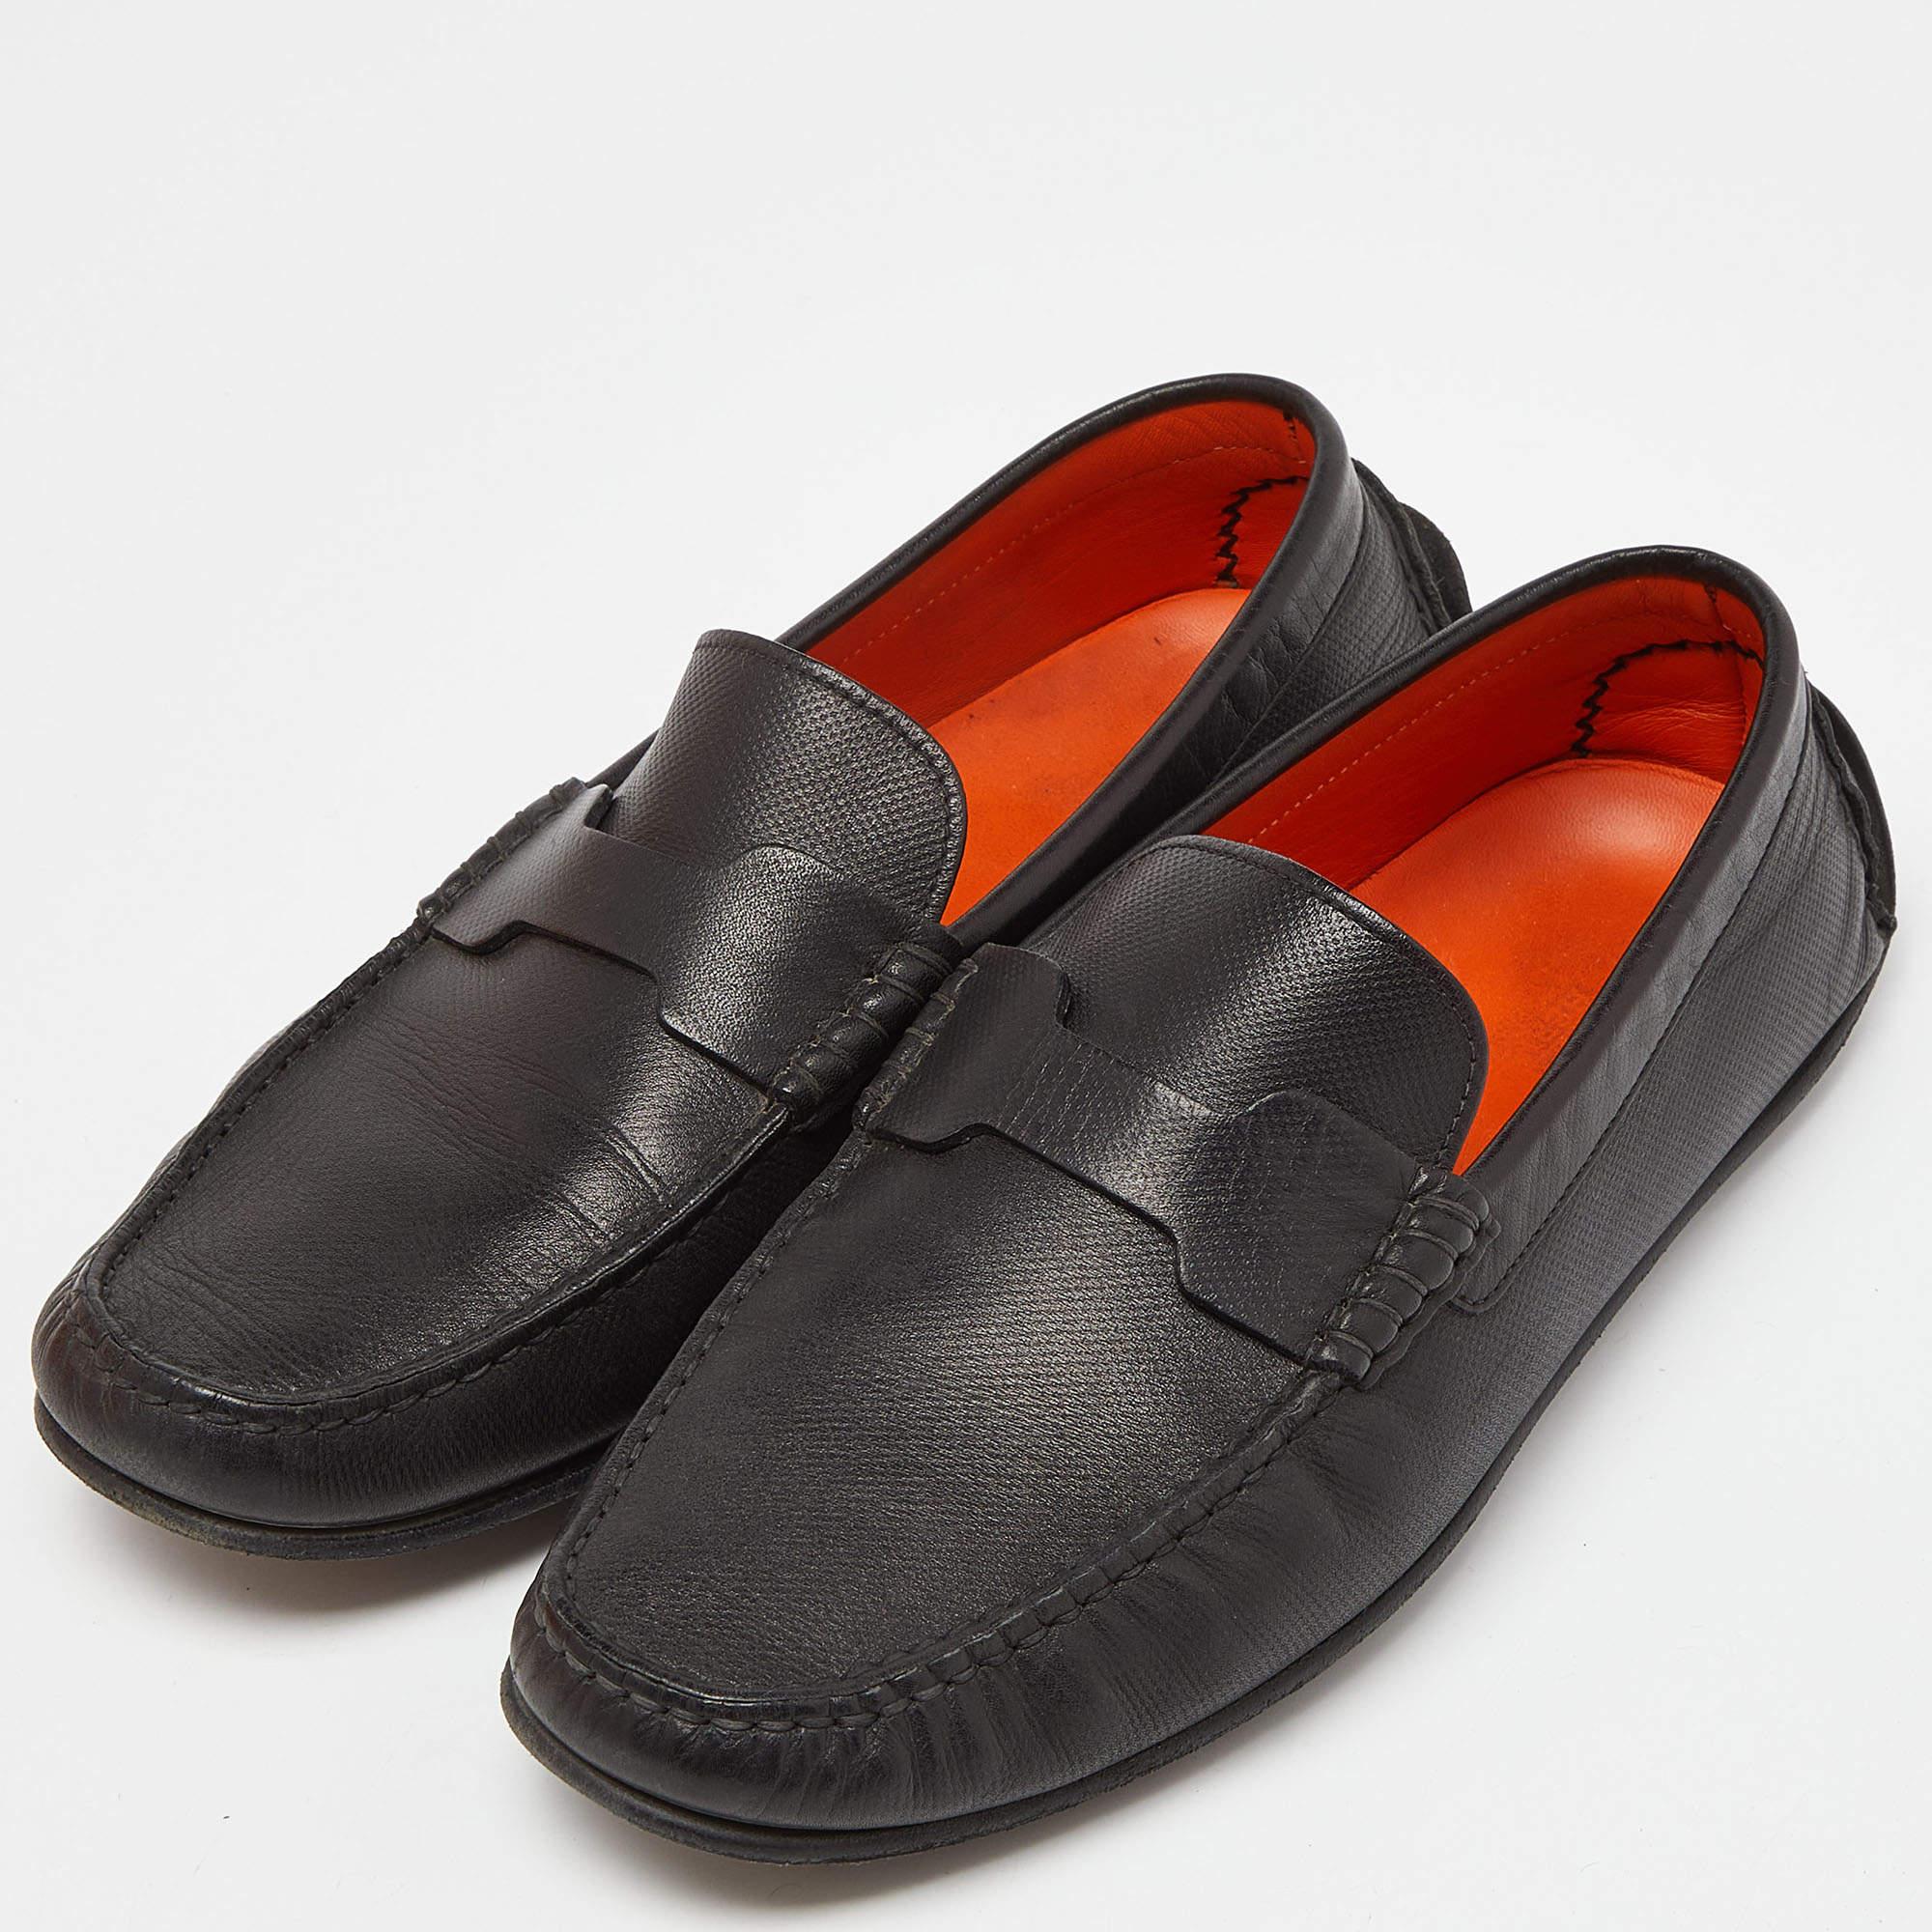 Hermes Black Leather Kennedy Slip On Loafers Size 40.5 2